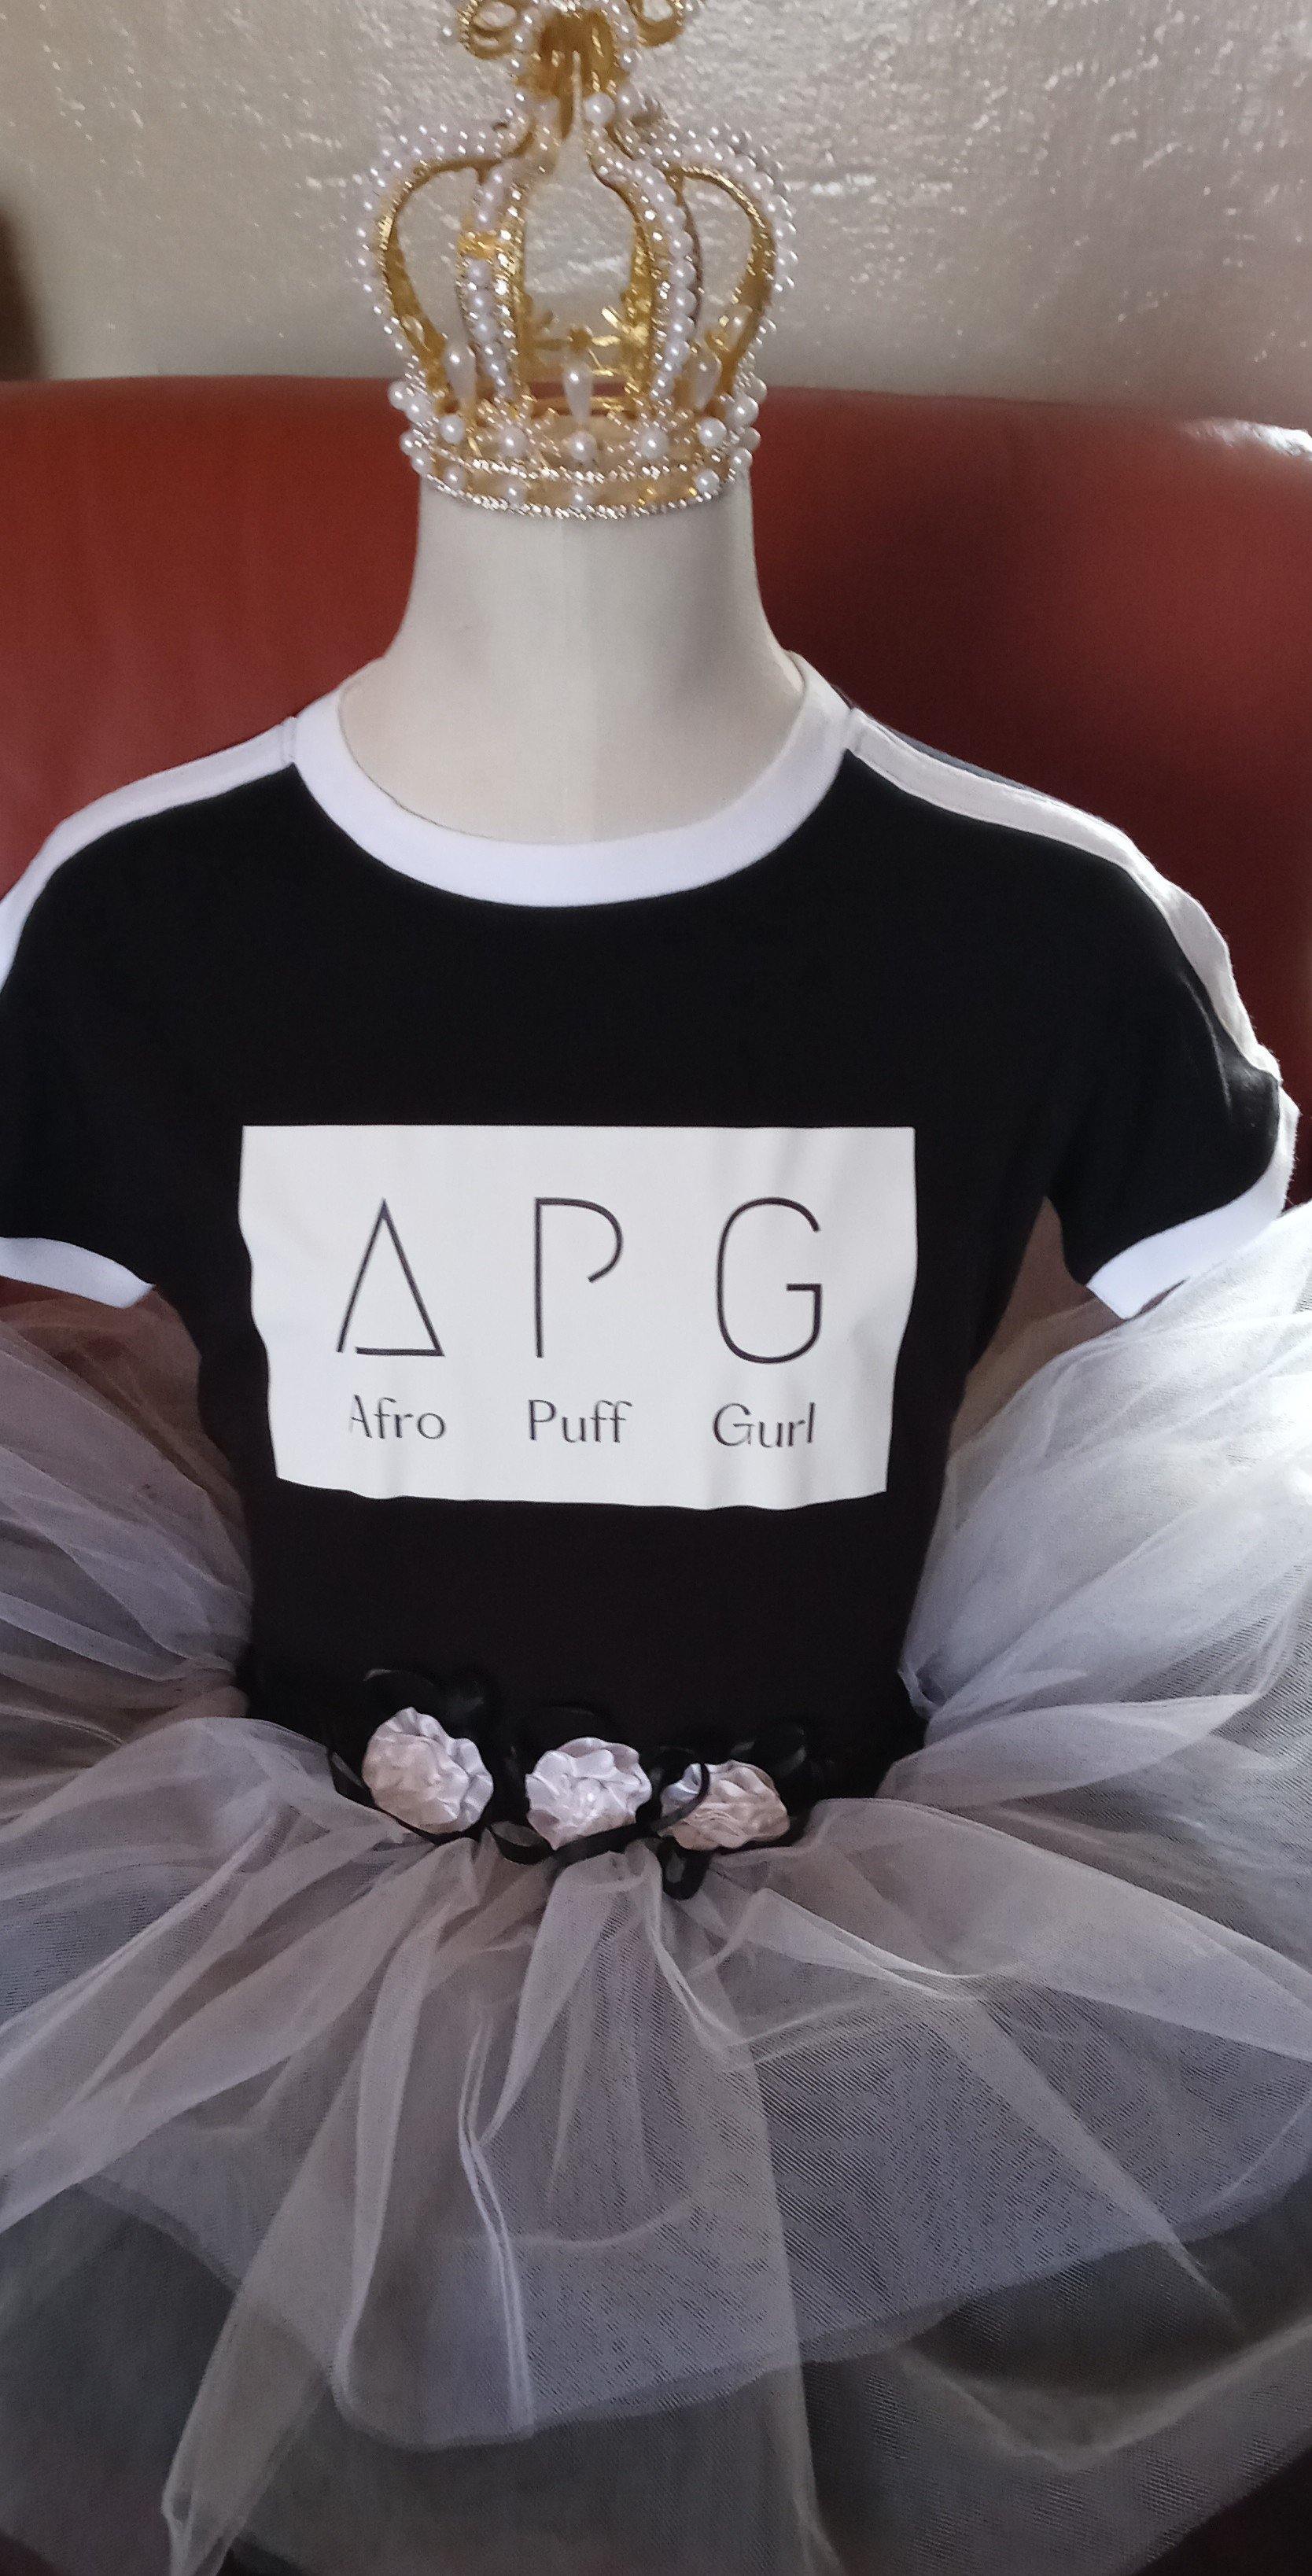 Afro Puff Gurl - APG Child Tee - Sticks and Stones Tees & More